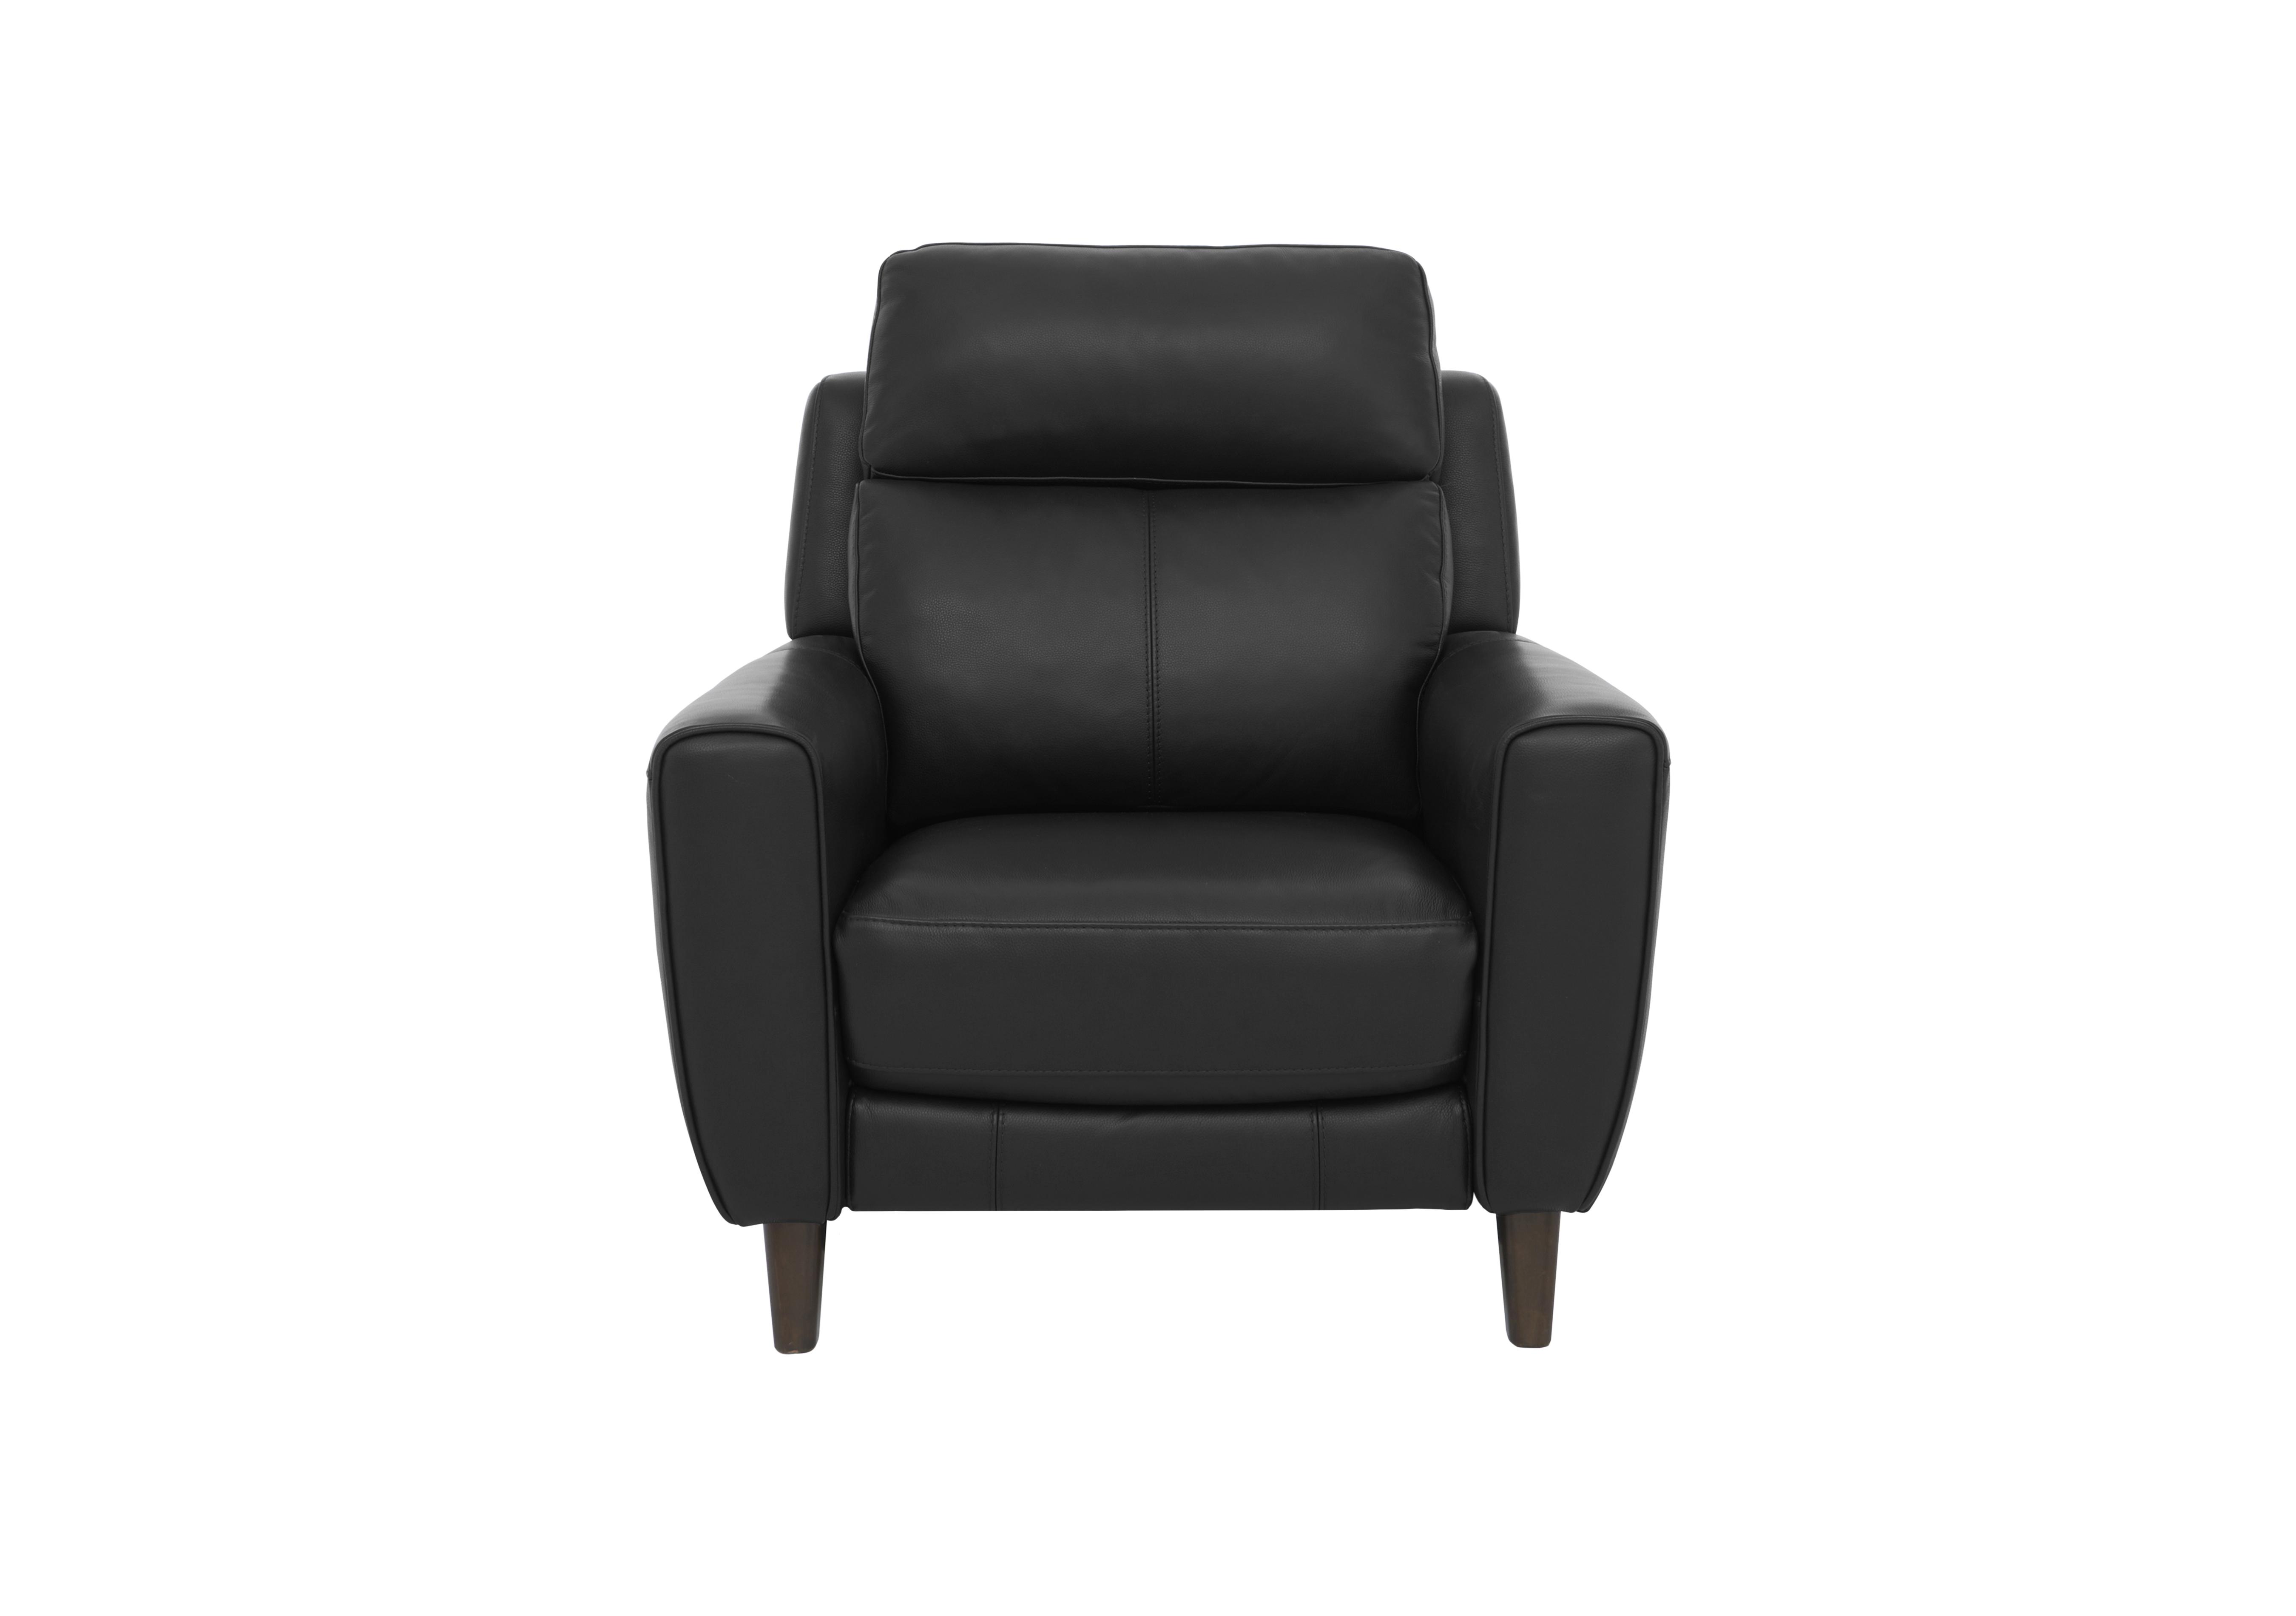 Zen Leather Power Recliner Chair with Power Headrest and Power Lumbar in Bx-023c Black on Furniture Village